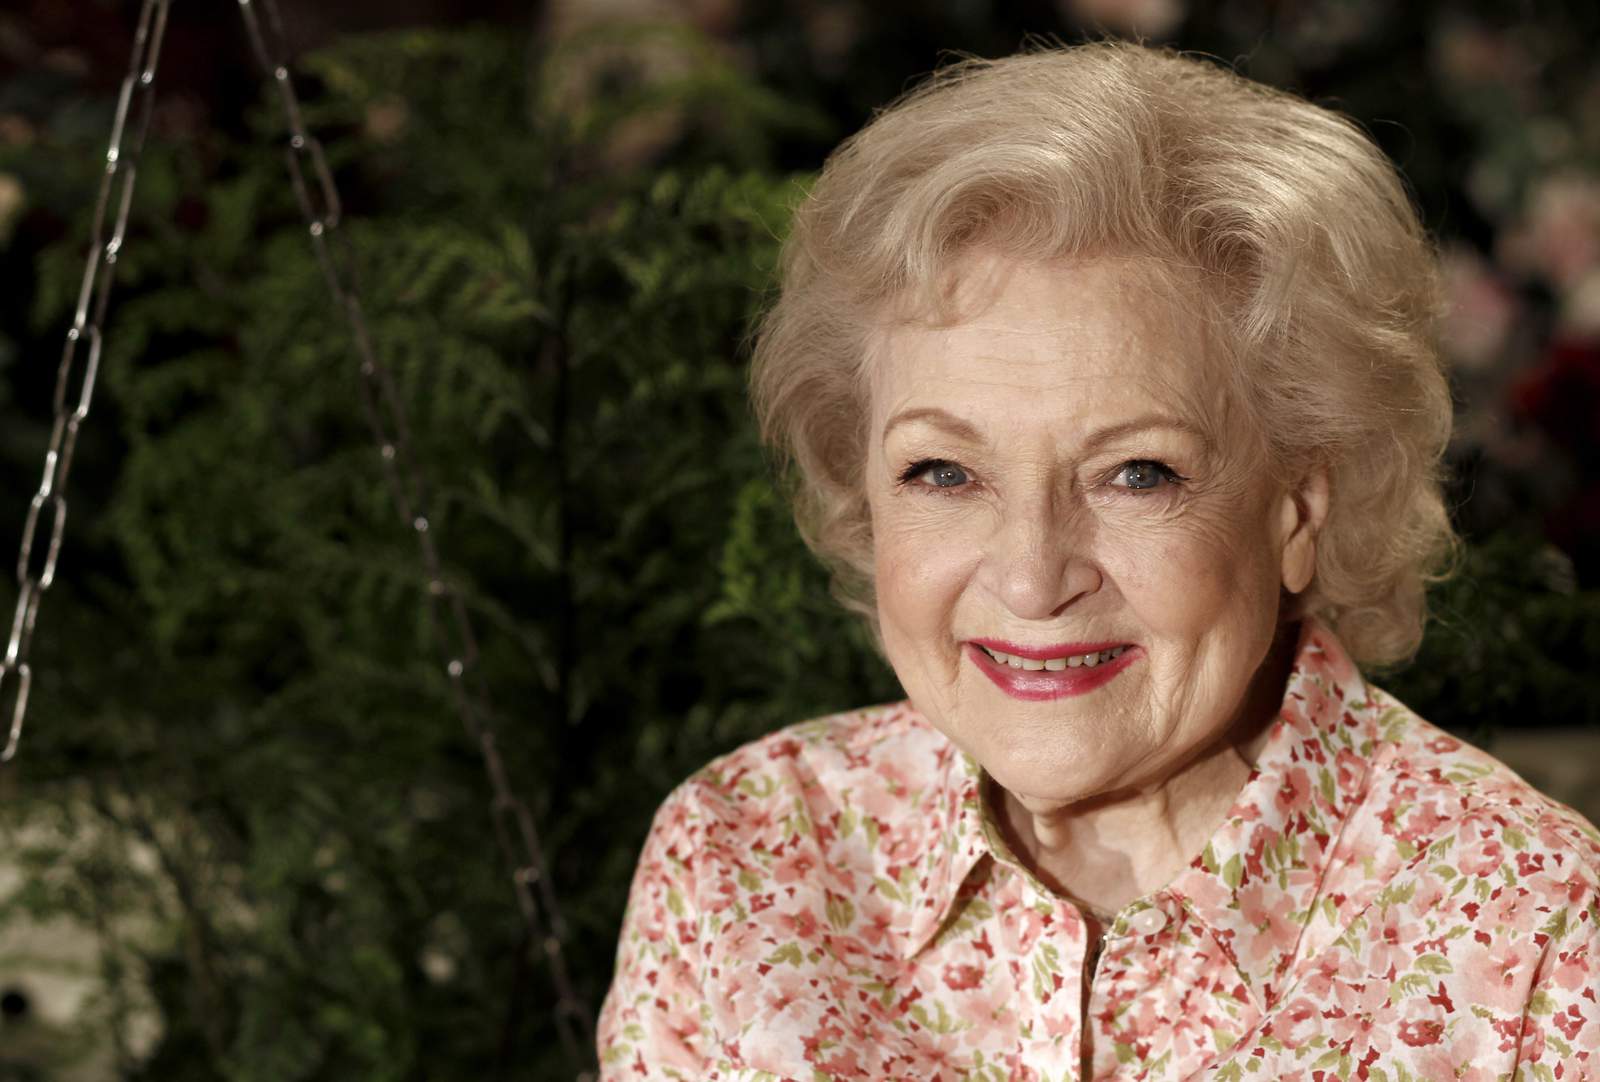 Betty White marks 99th birthday Sunday by staying up as late as she wants